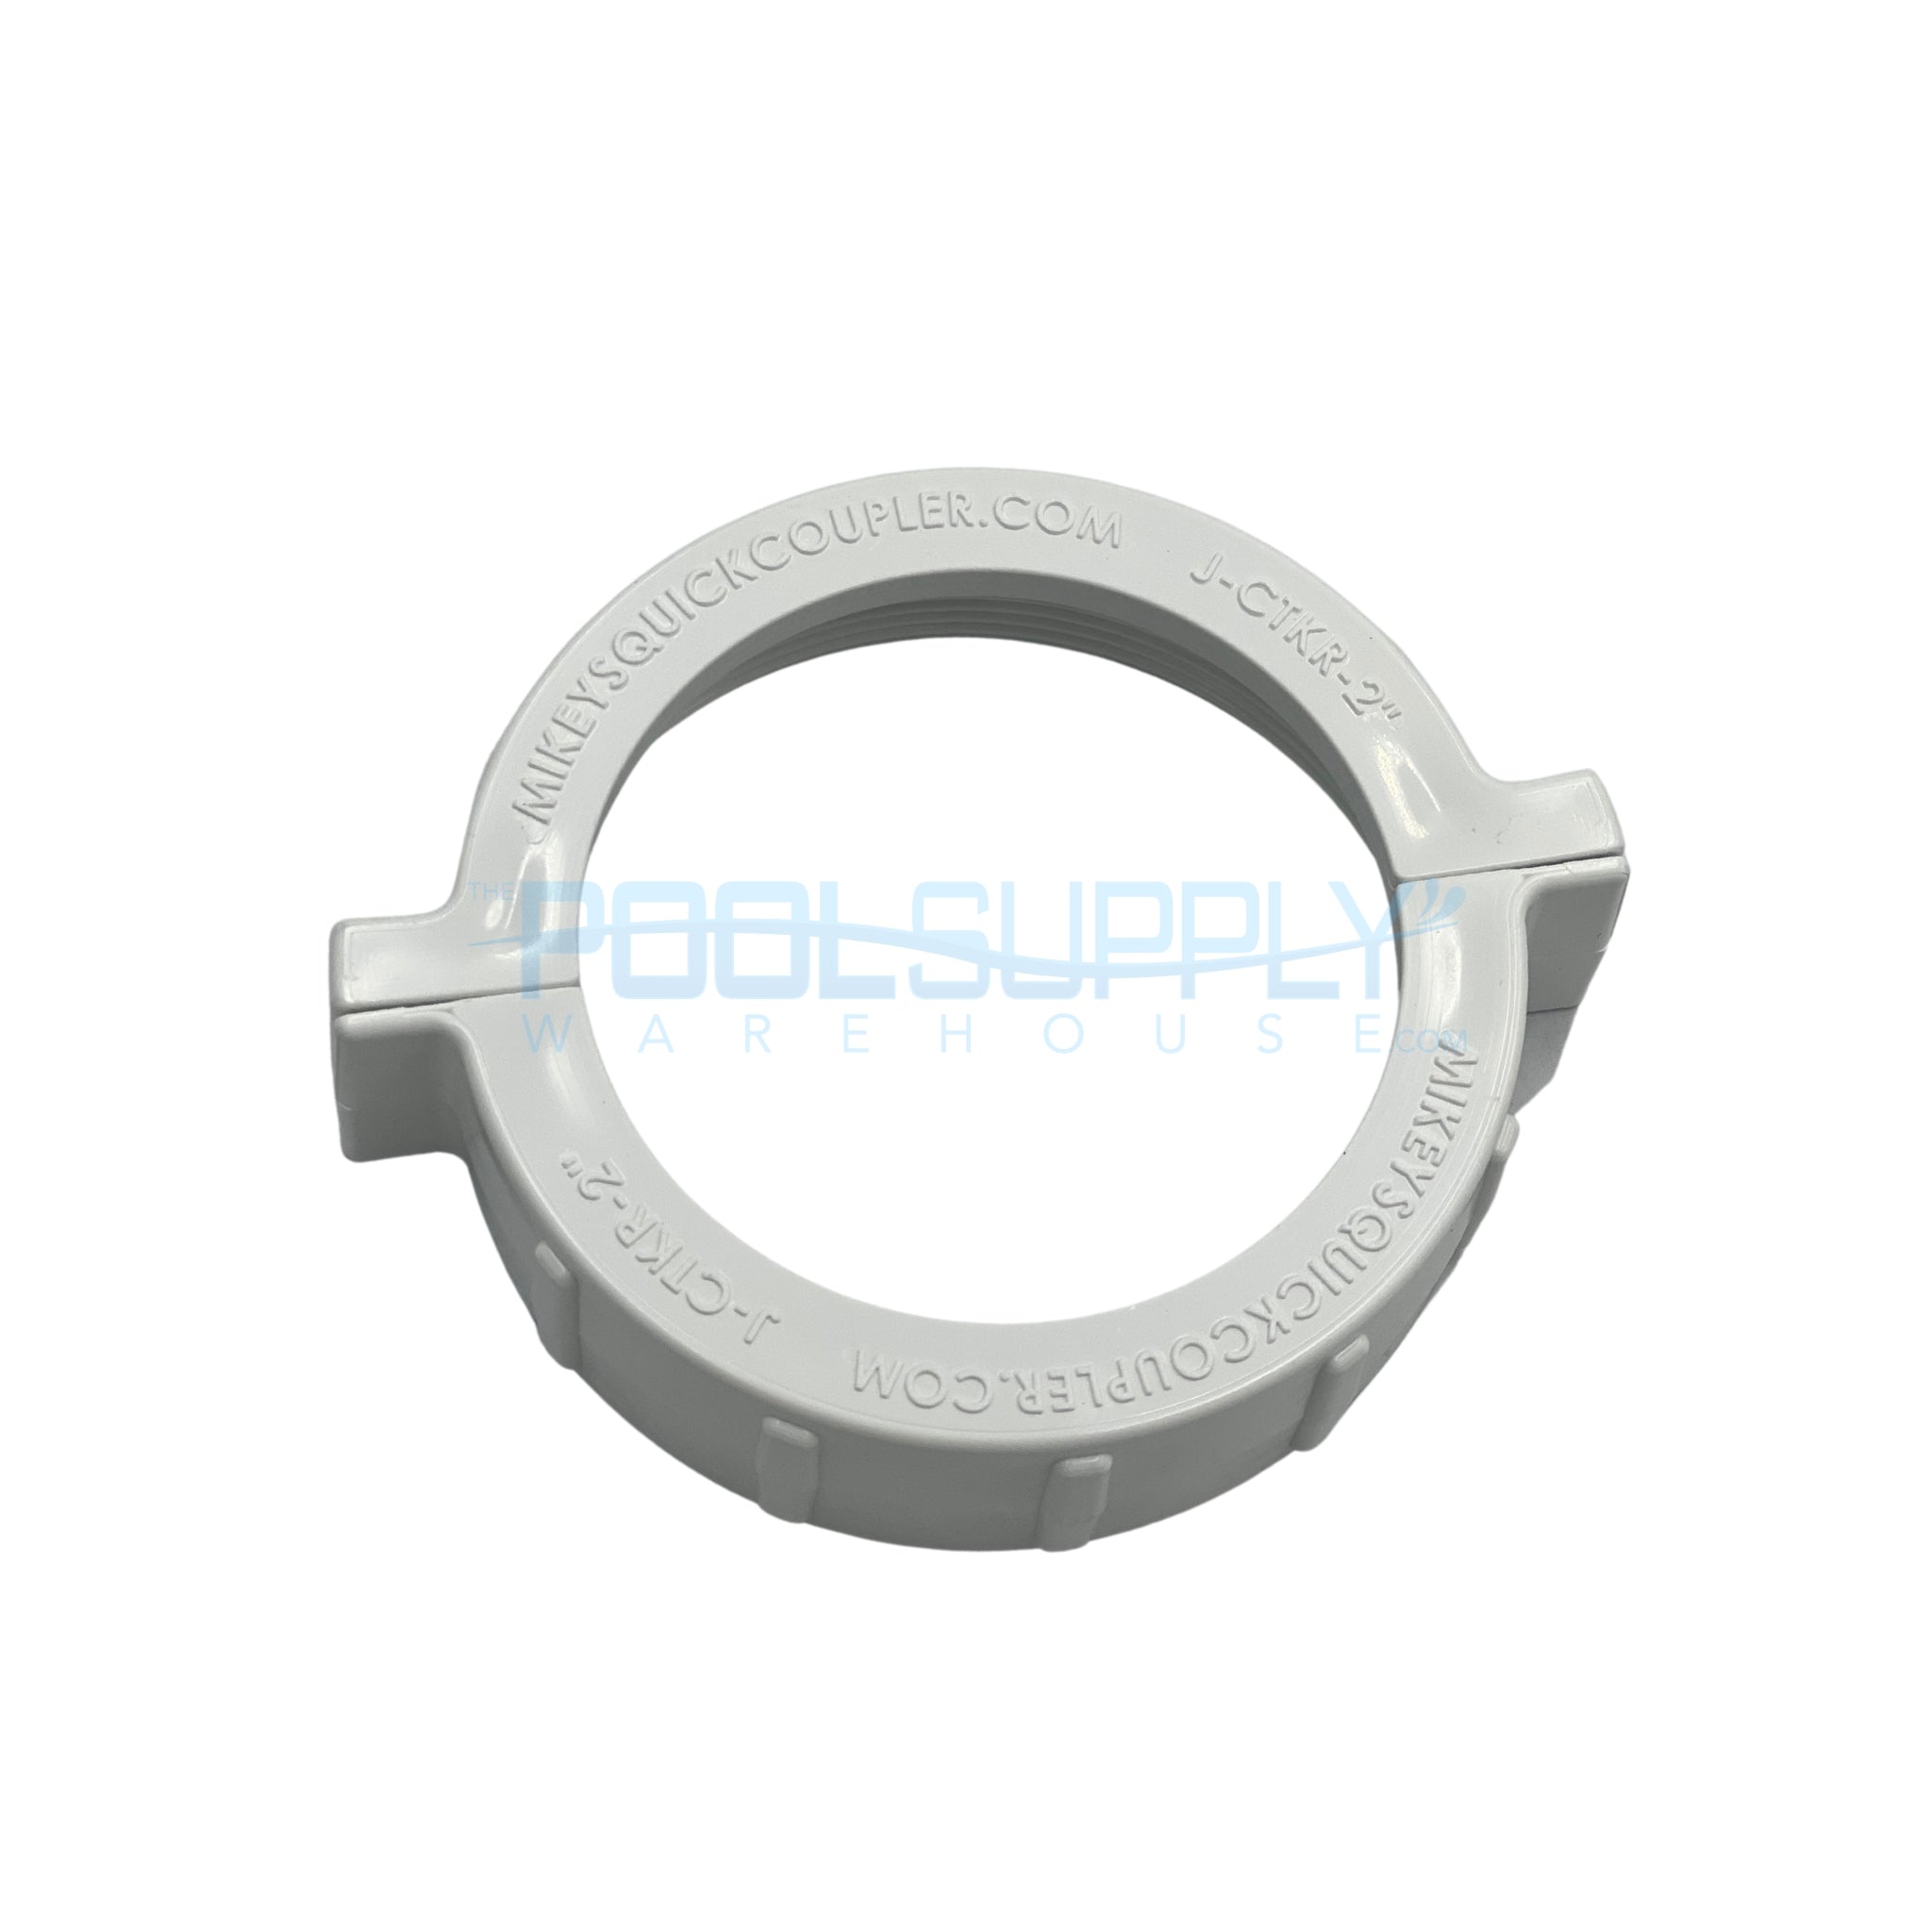 Mikeys Quick Coupler - J-CTK-2” - The Pool Supply Warehouse